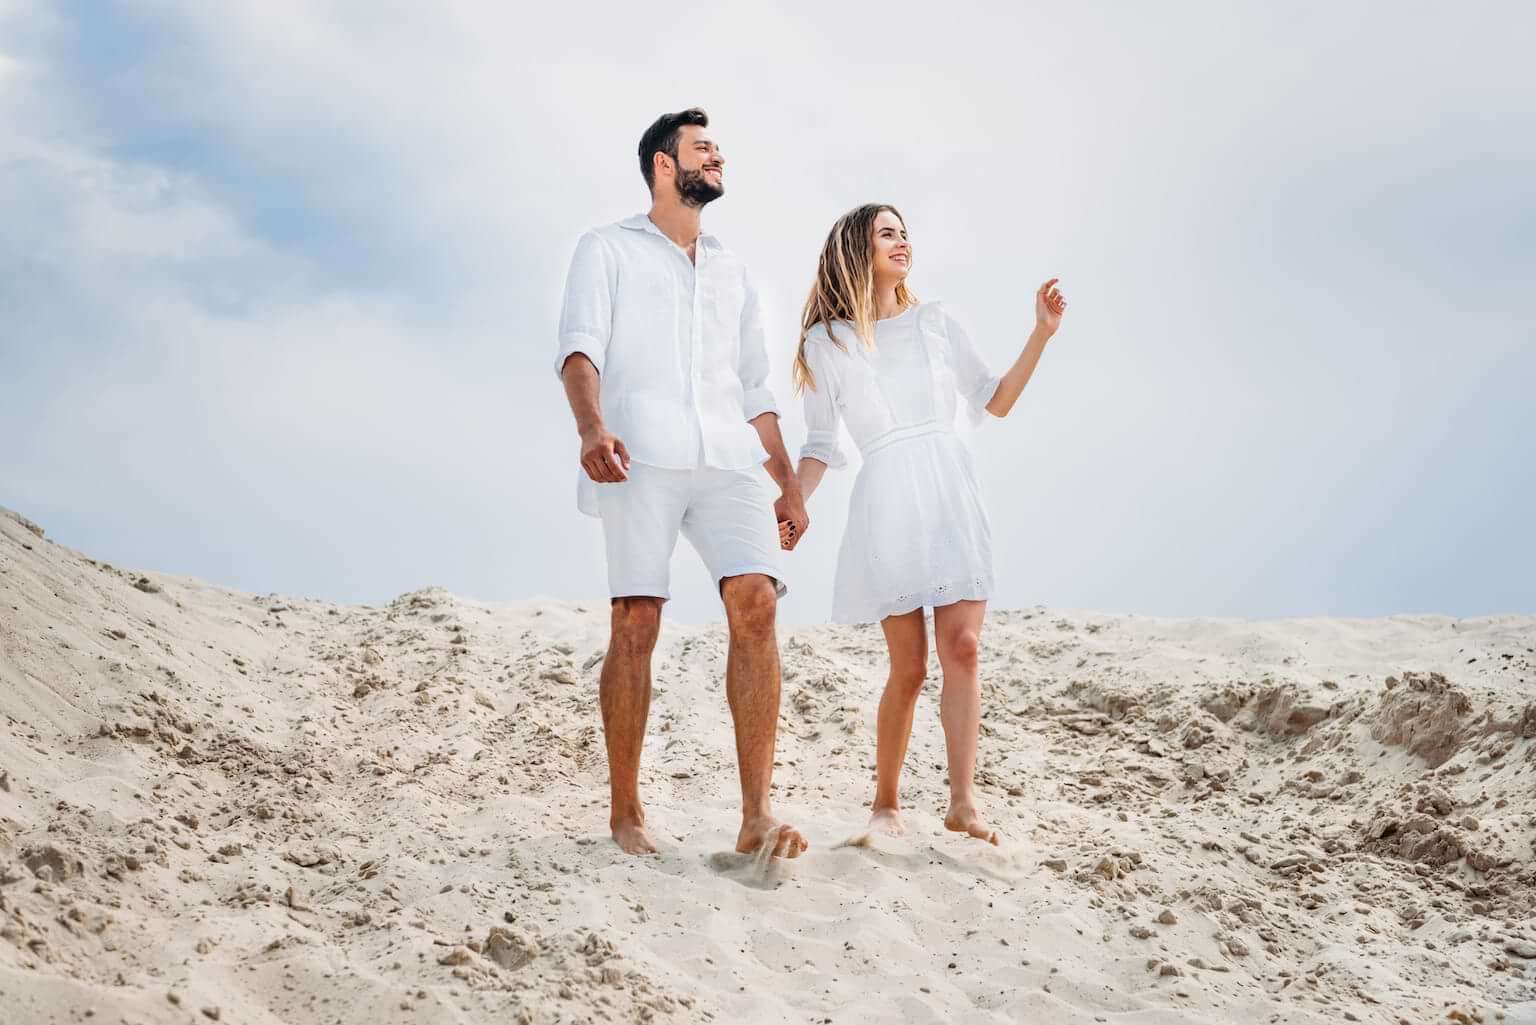 A man and woman, both dressed in white summer clothes, hold hands as they walk barefoot on a sandy dune. By LIGHTFIELD STUDIOS/stock.adobe.com. An illustration of the origin of why you can't white after Labor Day